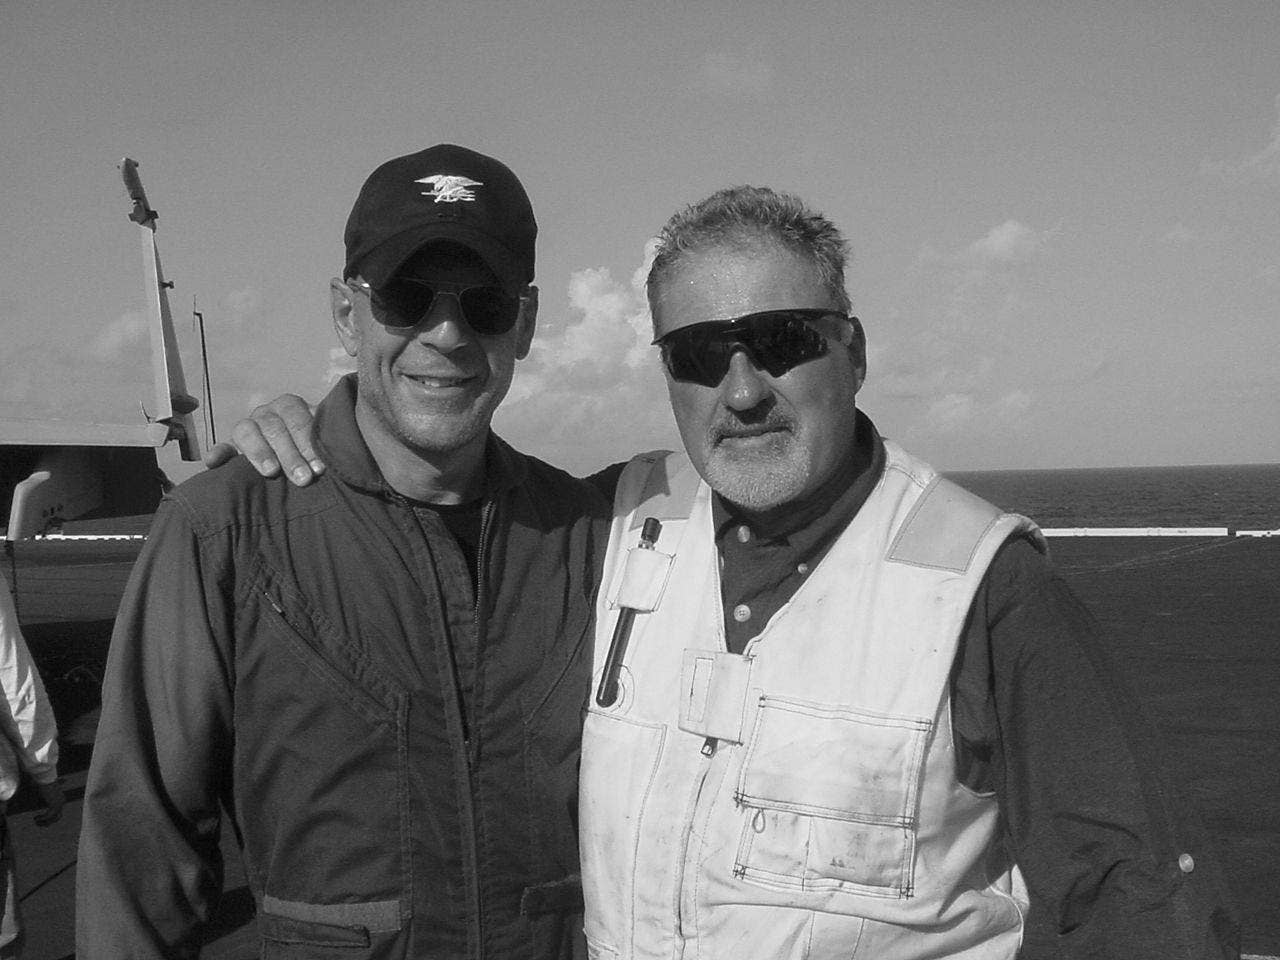 Bruce Willis and Harry Humphries on (HS TRUMAN CVN 75) set for <em>Tears of the Sun</em>. Photo credit Wikipedia.